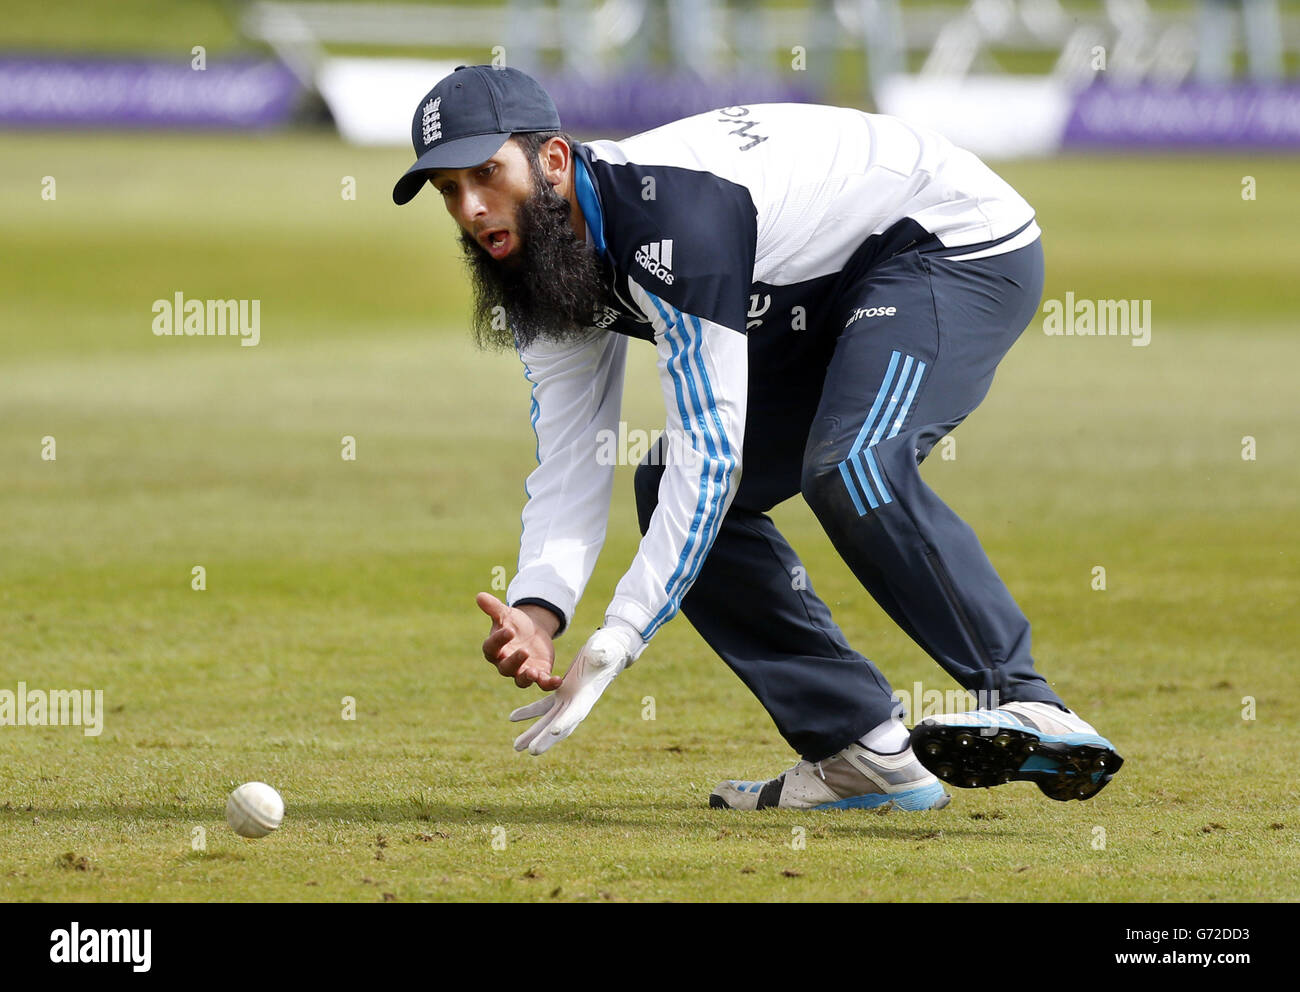 Football - match amical - Ecosse v Angleterre - Angleterre - Session de formation Mannofield Cricket Ground Banque D'Images